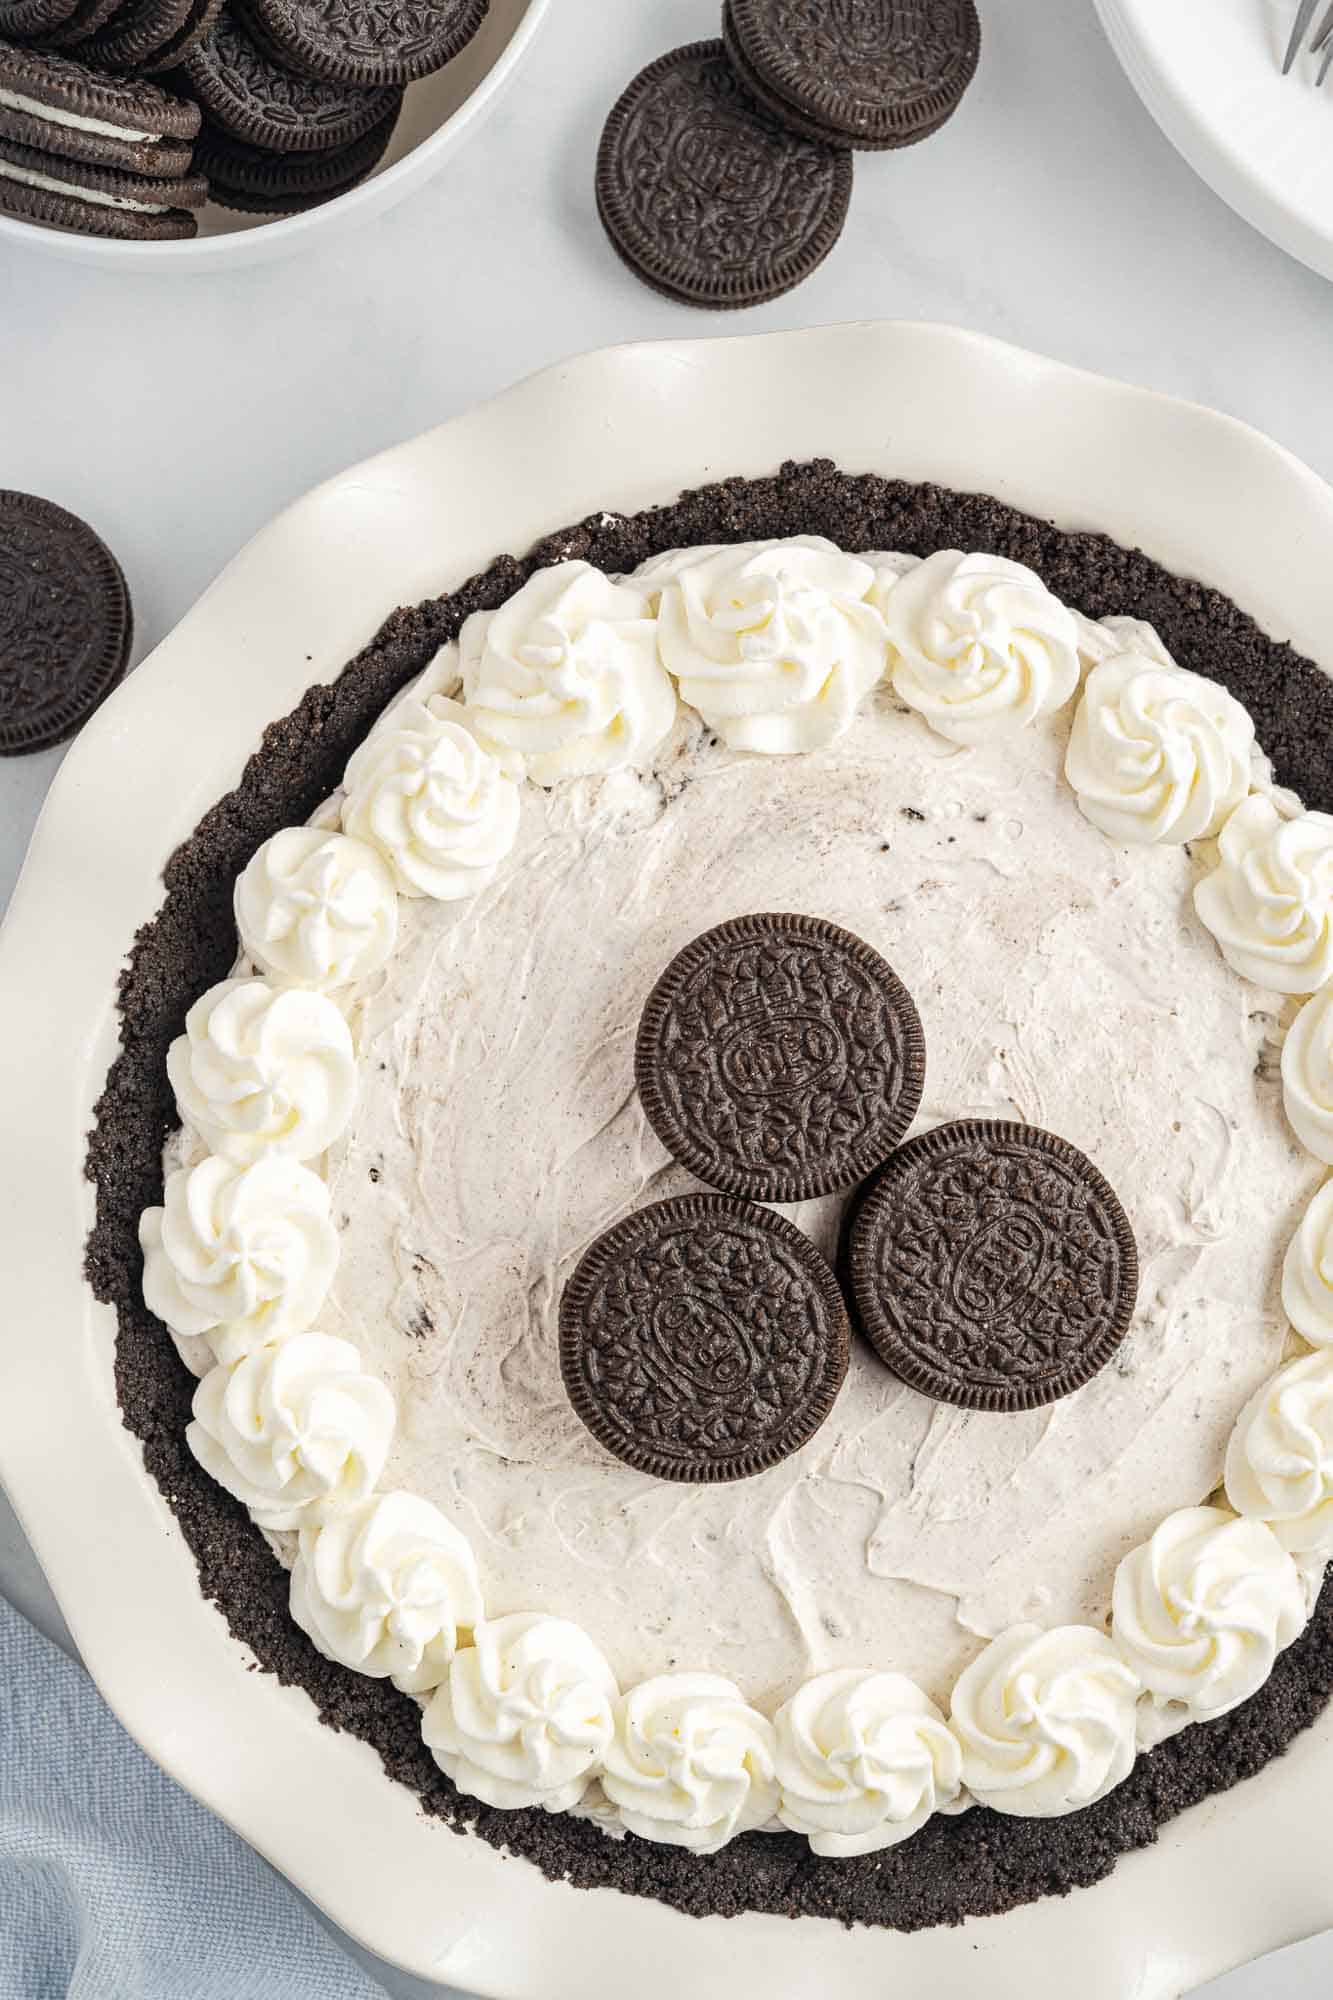 A whole oreo pie in a white pie plate, topped with whipped cream and oreo cookies, viewed from above.